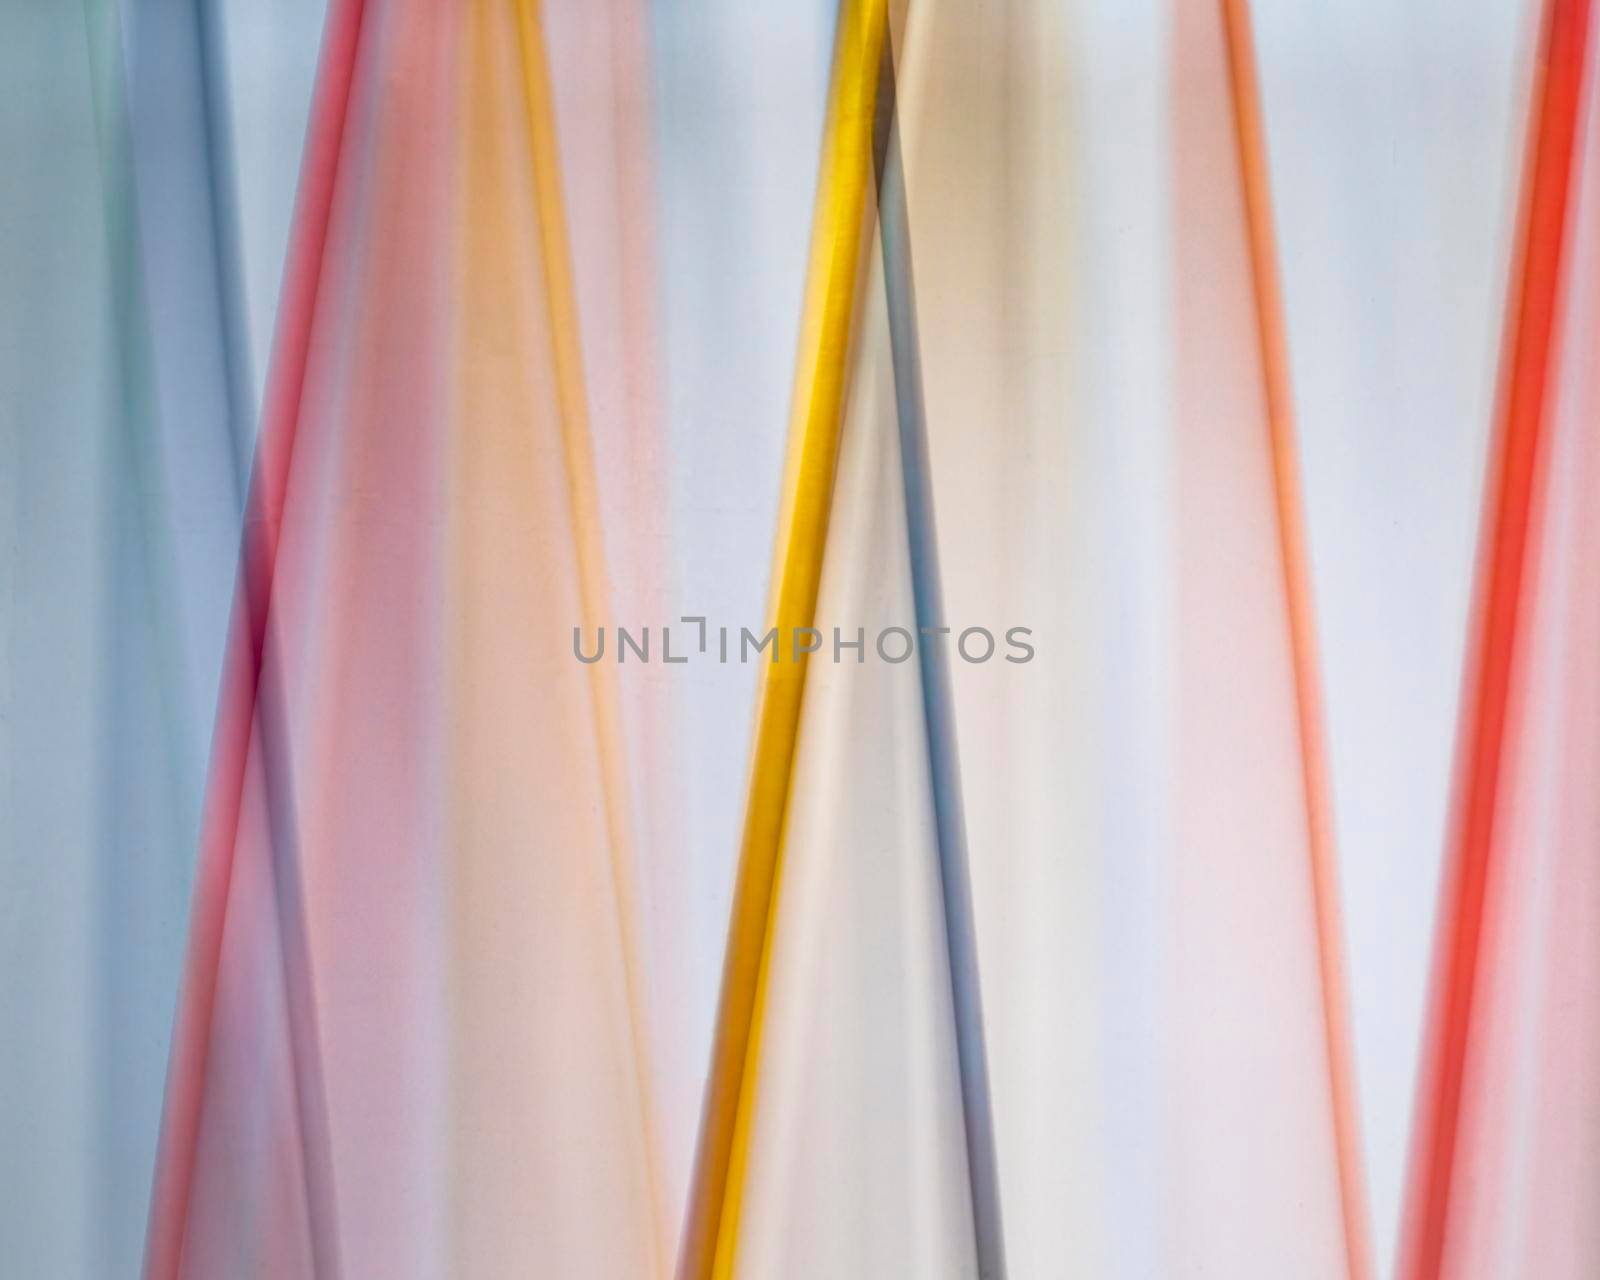 Colored dowels swing against a white background in a time lapse photo.